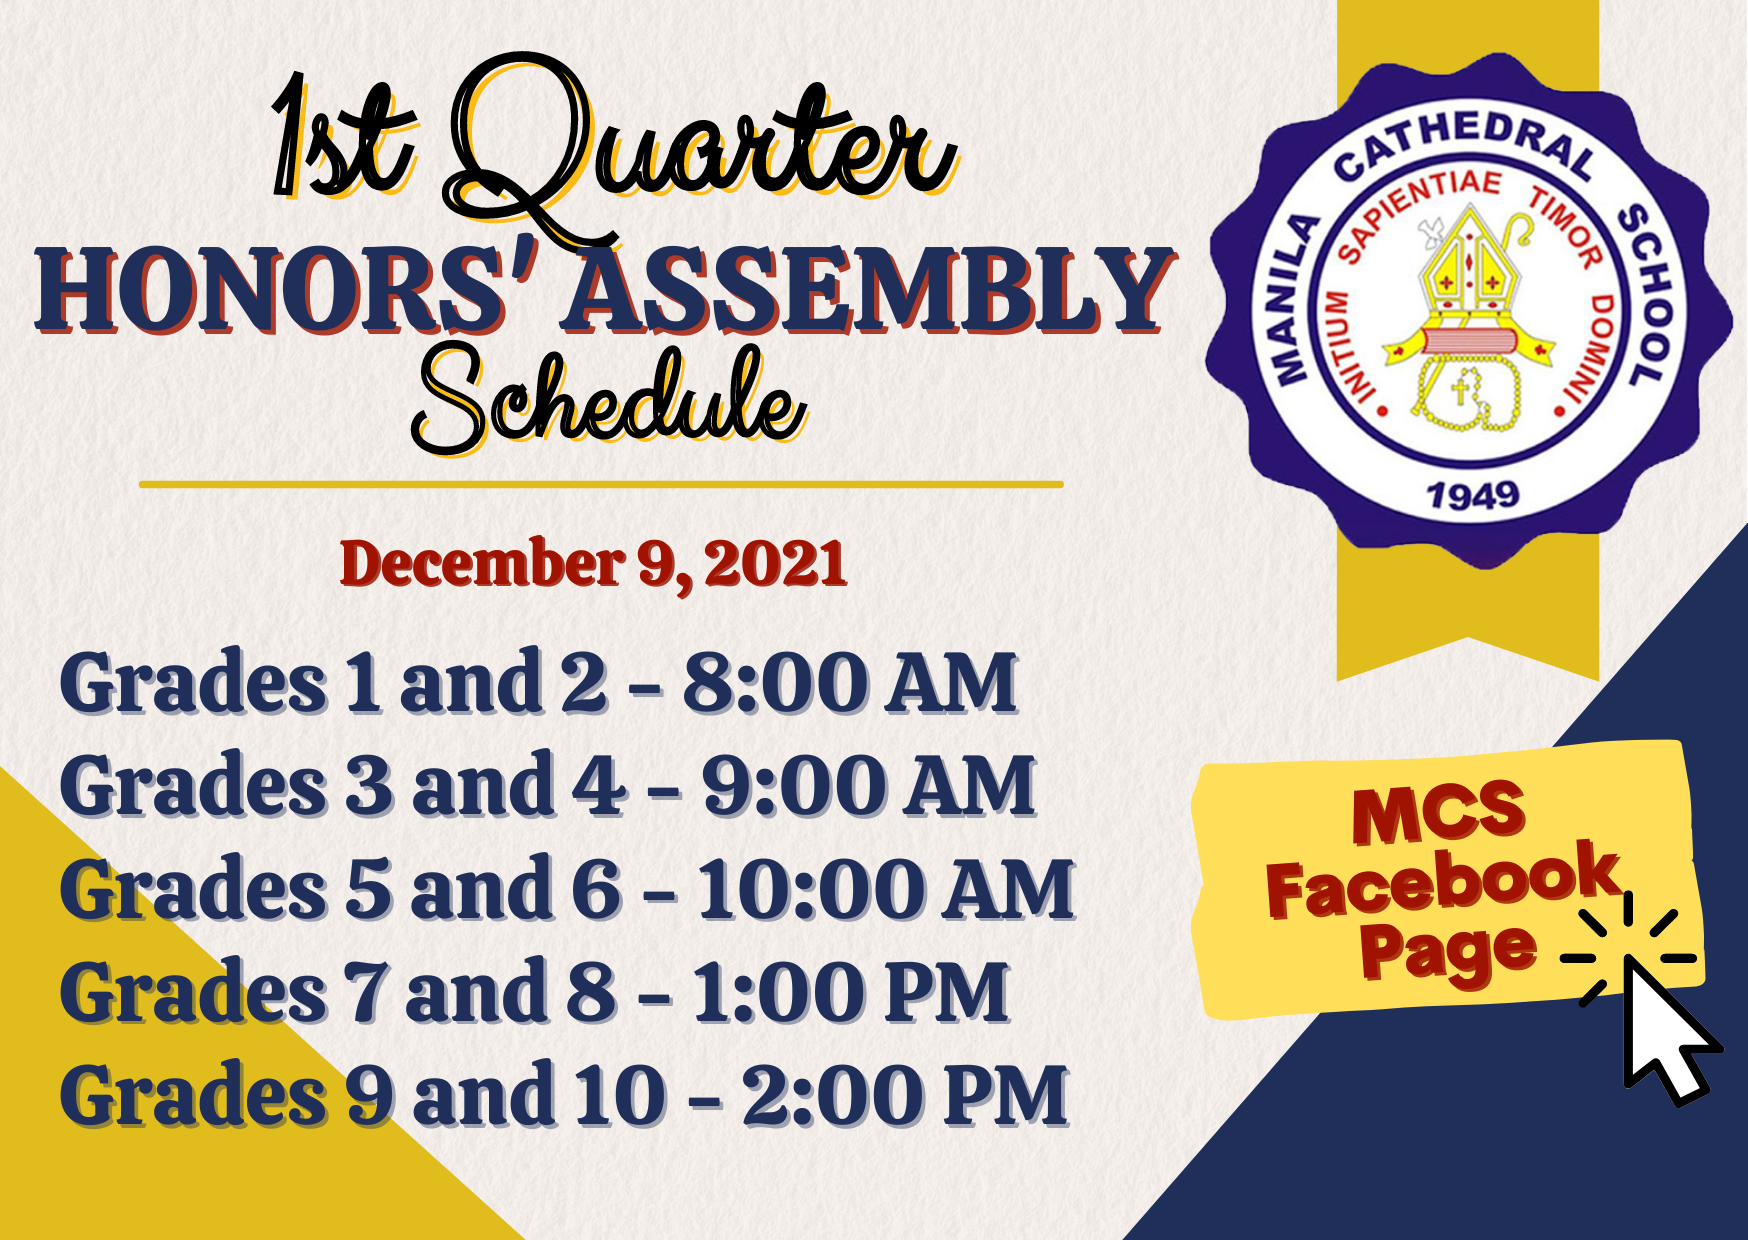 Head's up, MCSians! Here is the schedule of our 1st Quarter Virtual Honors' Assembly on December 9, 2021! Stay tuned!